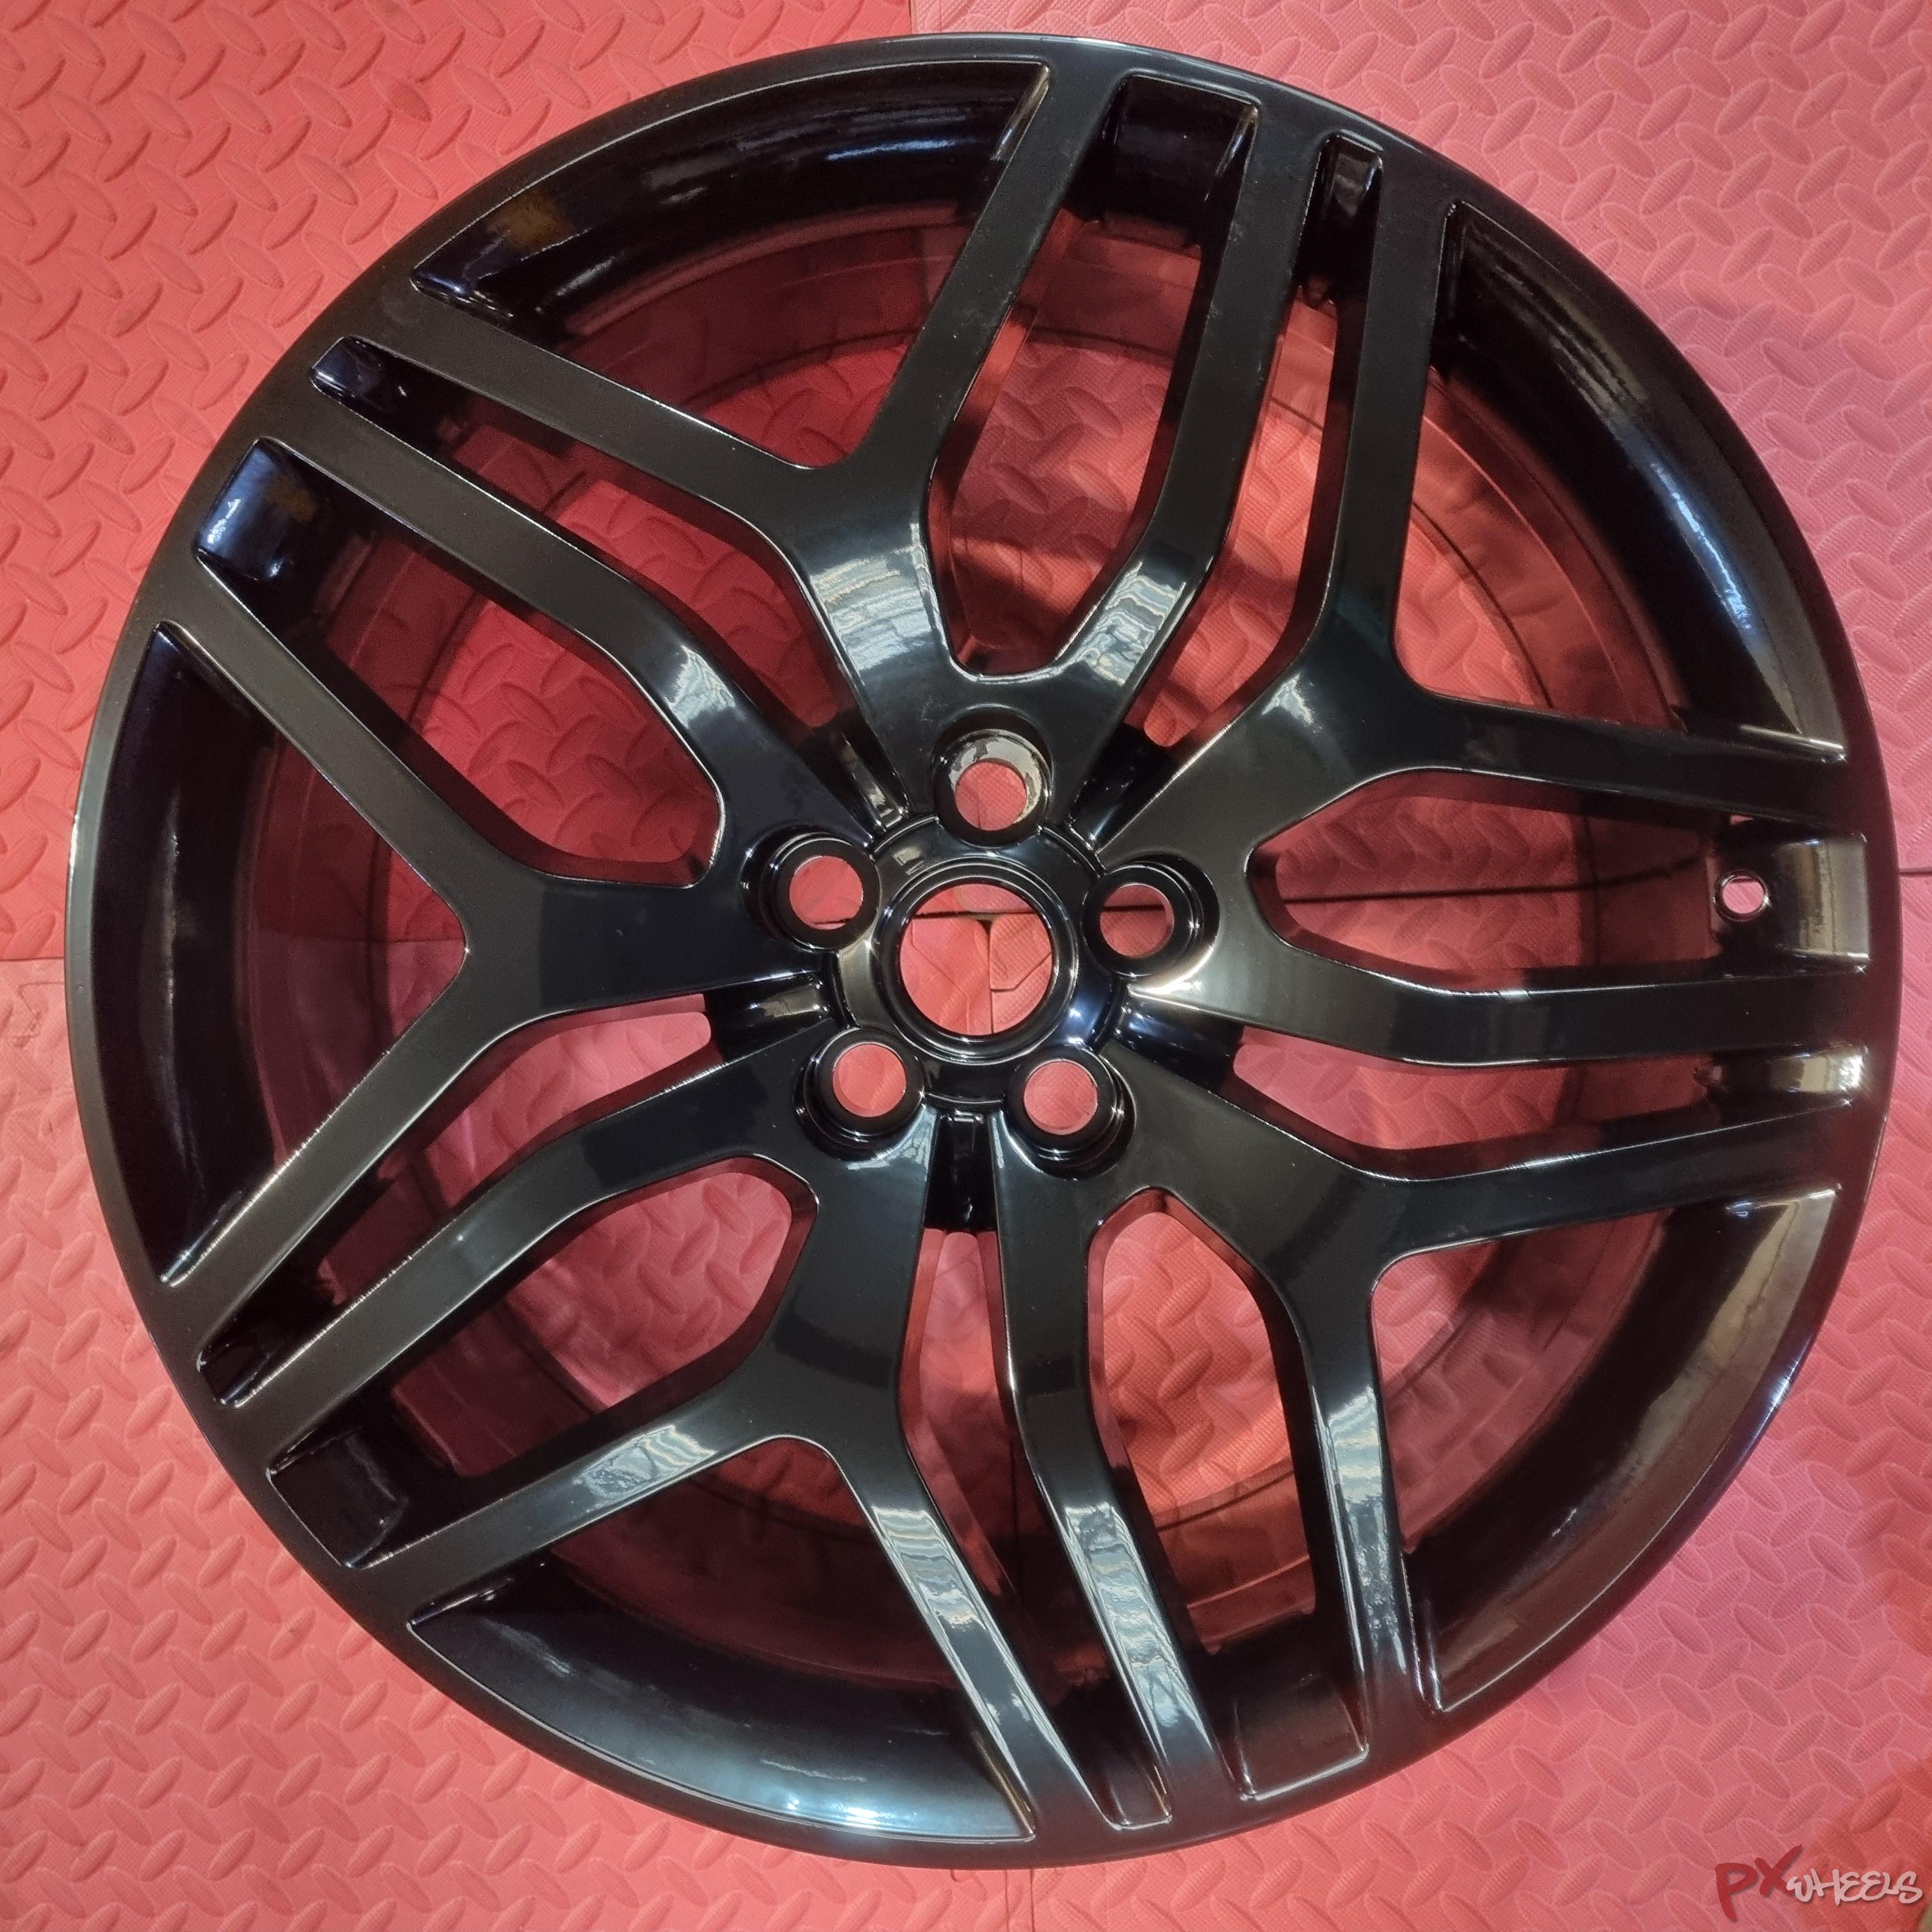 Land Rover Discovery 3 Y spoke design Alloy Wheel